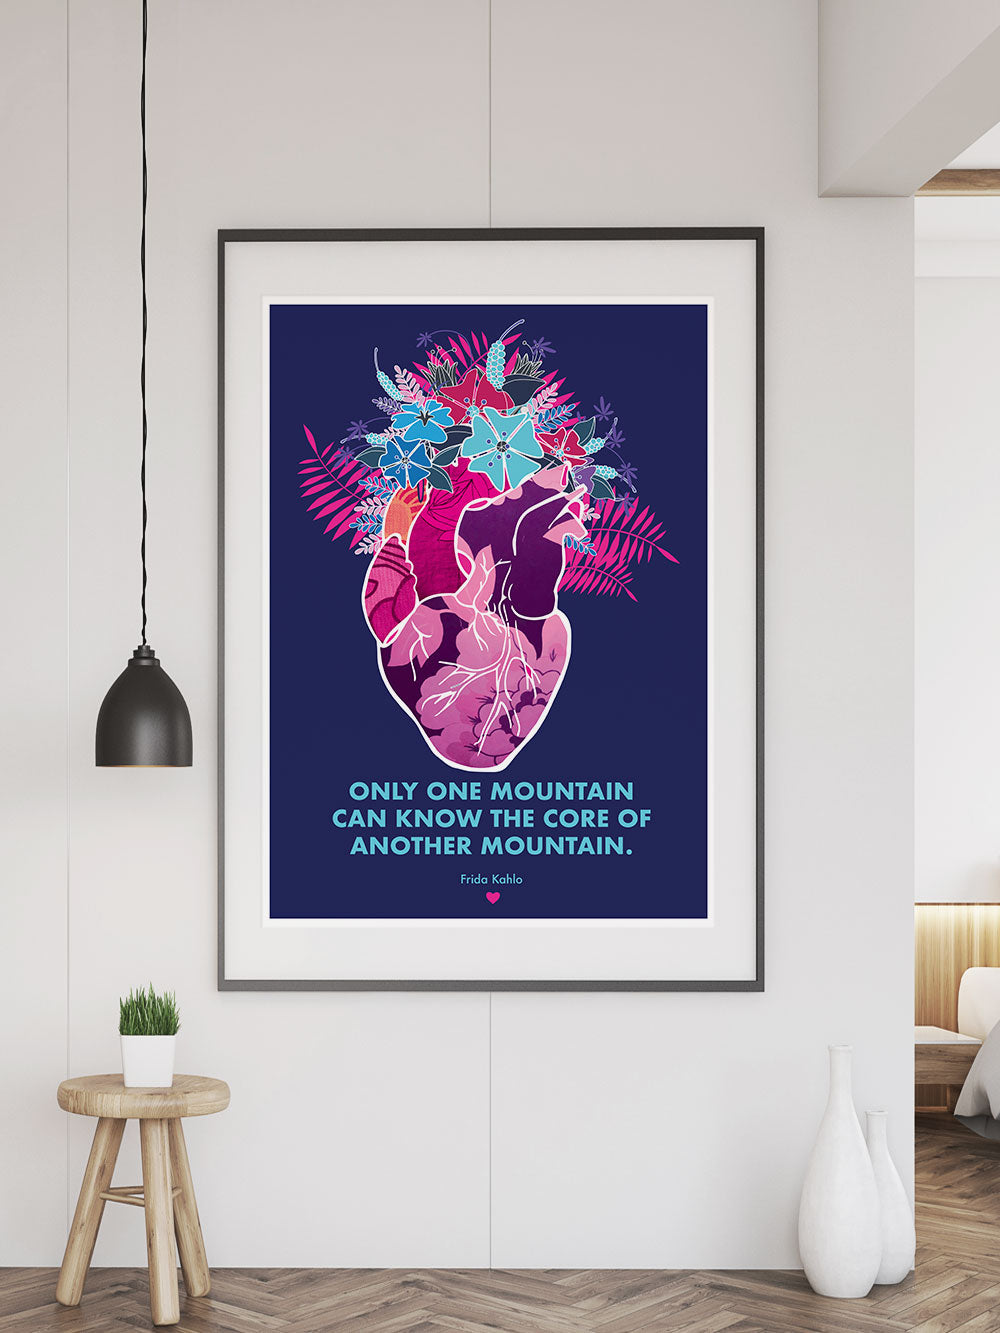 Only One Mountain Illustration Print in a frame on a wall